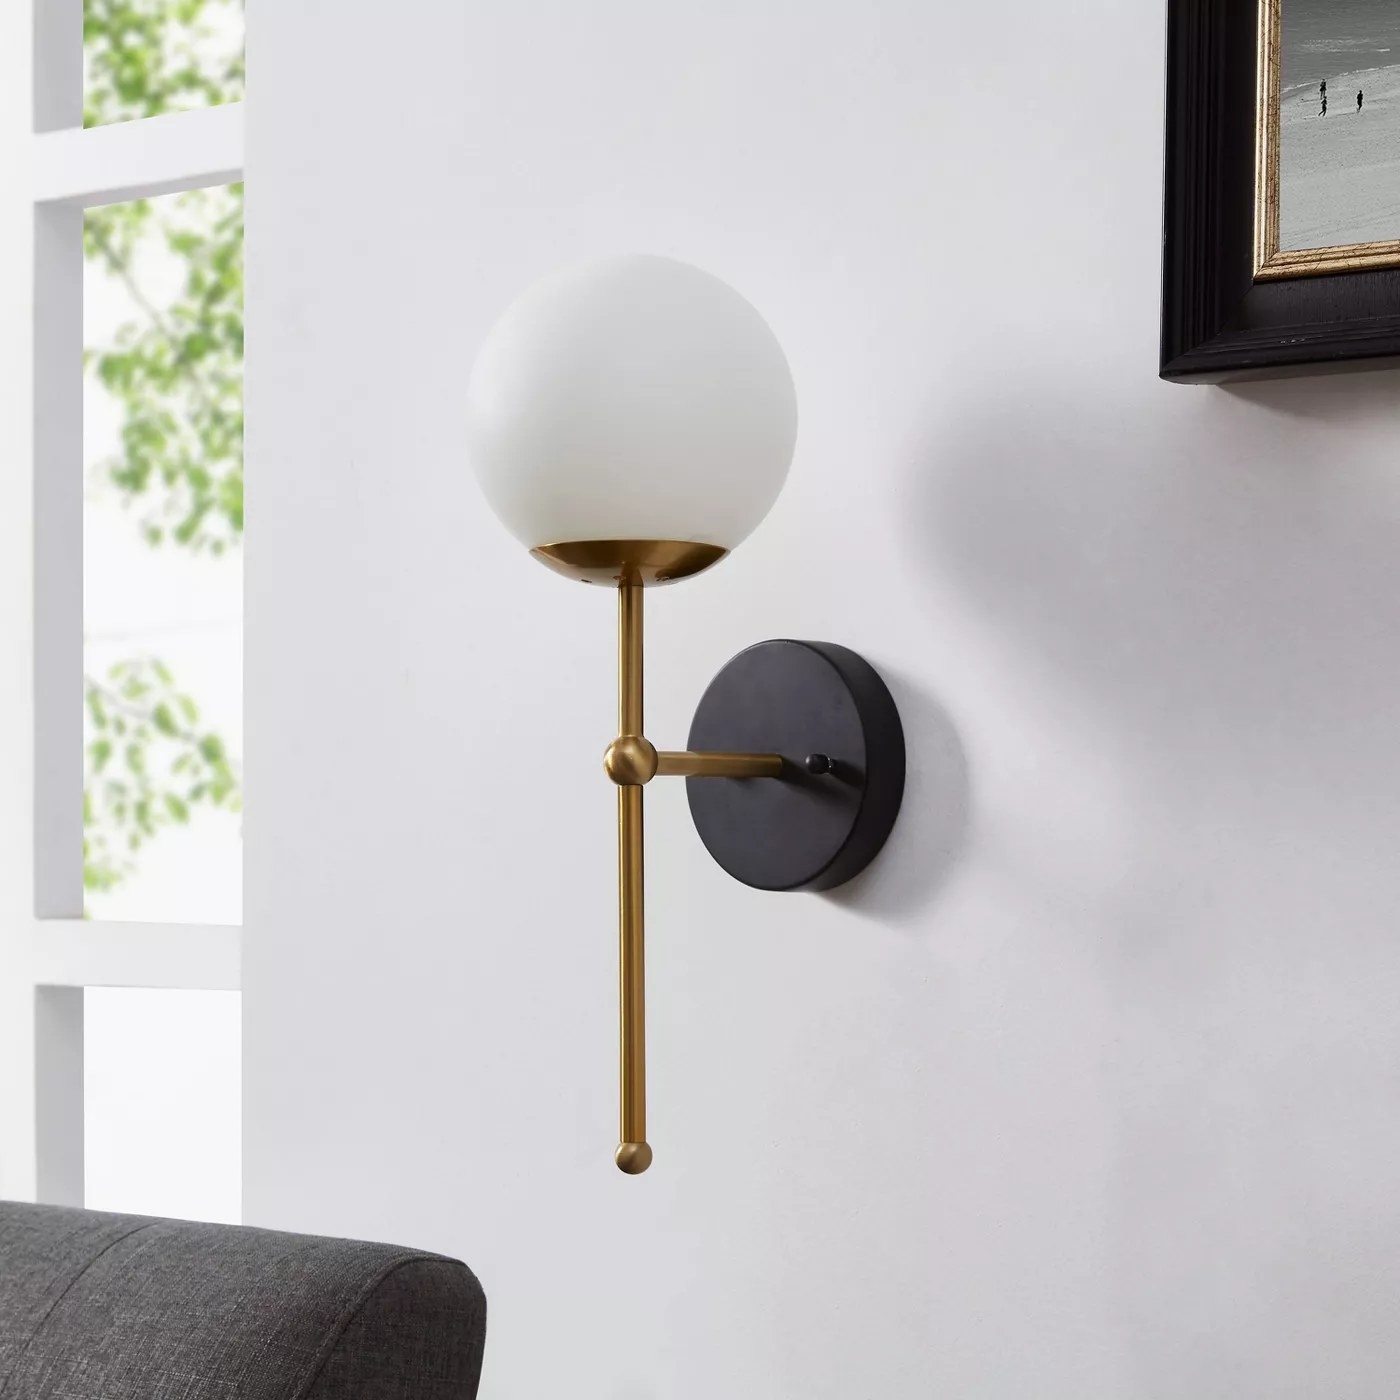 The 16-inch brass wall sconce with a white glass globe